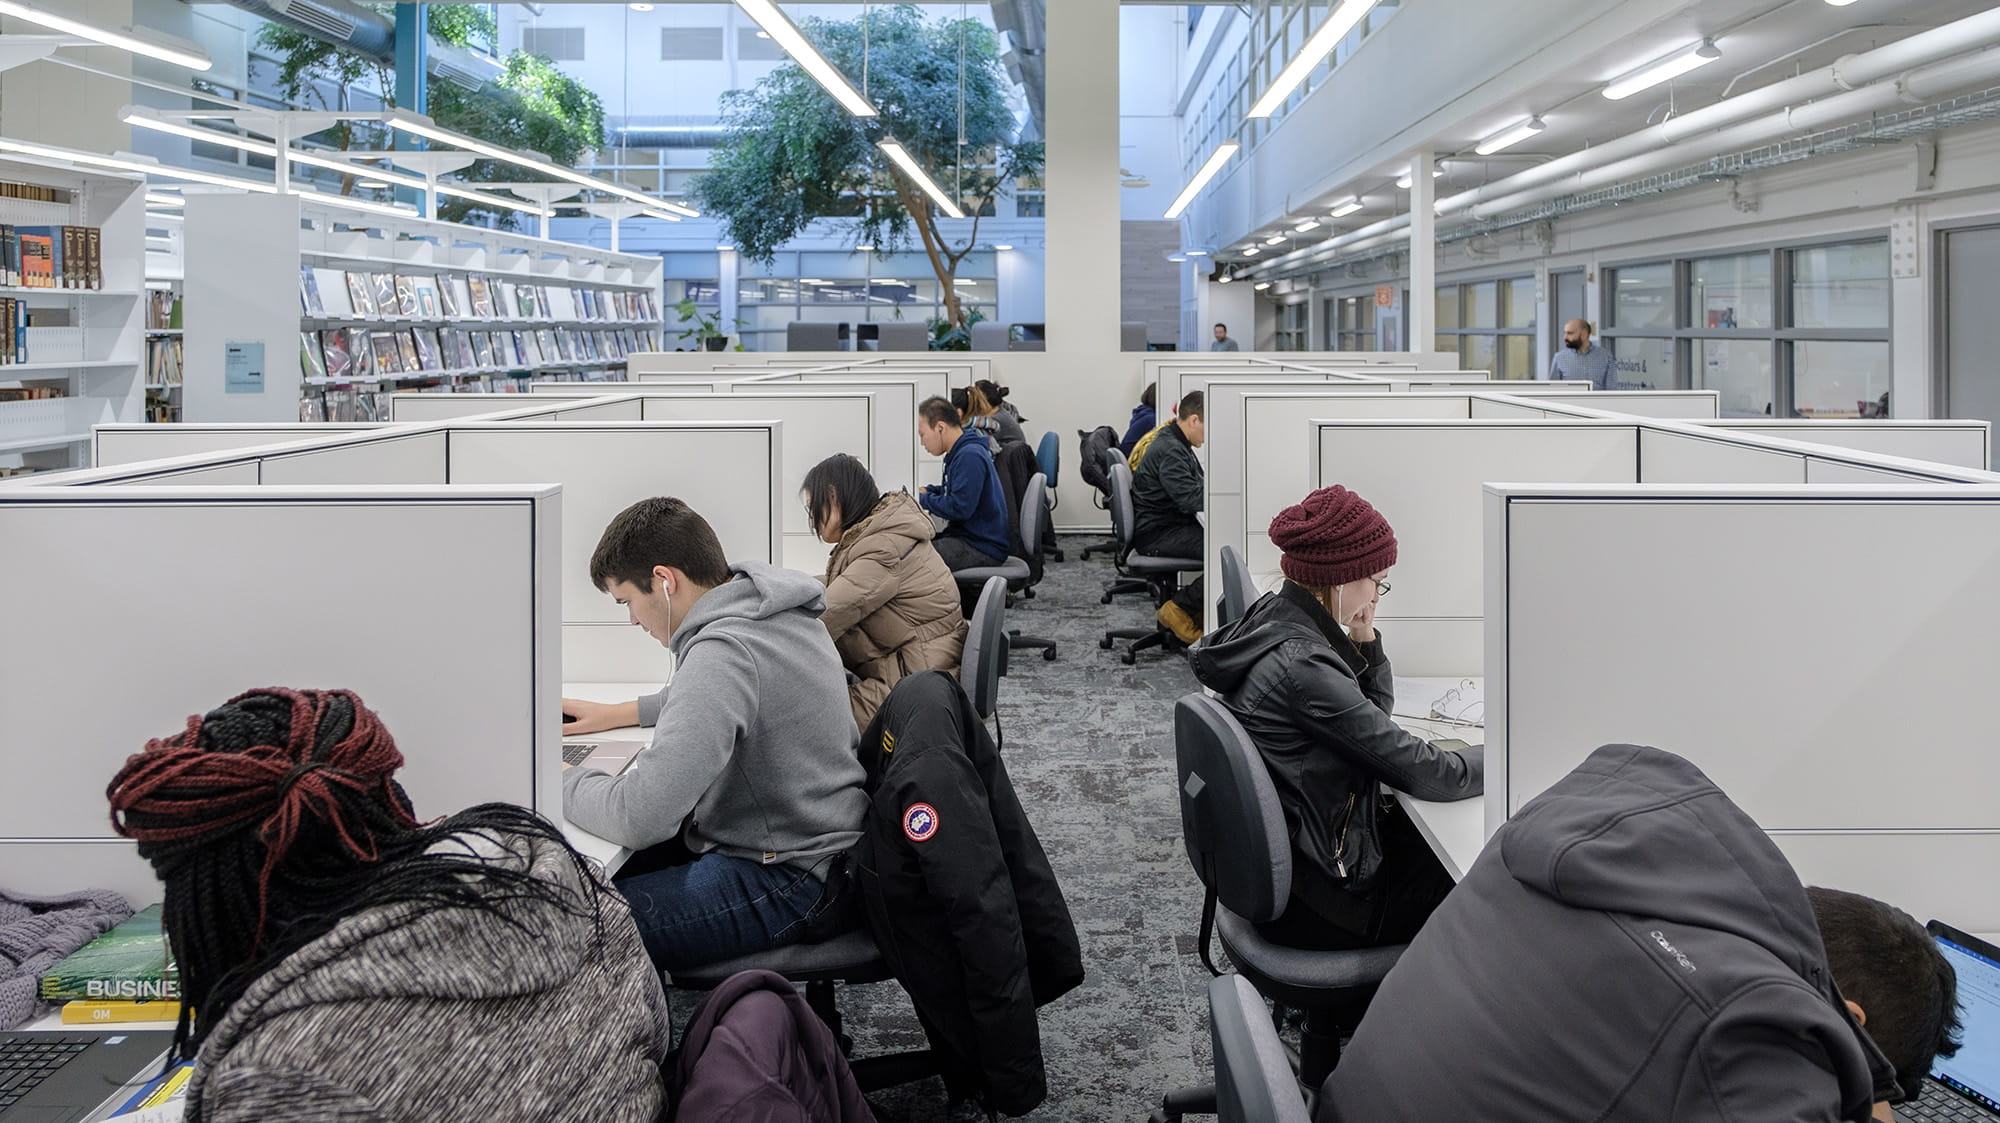 Students working at semi-private desk spaces in the library